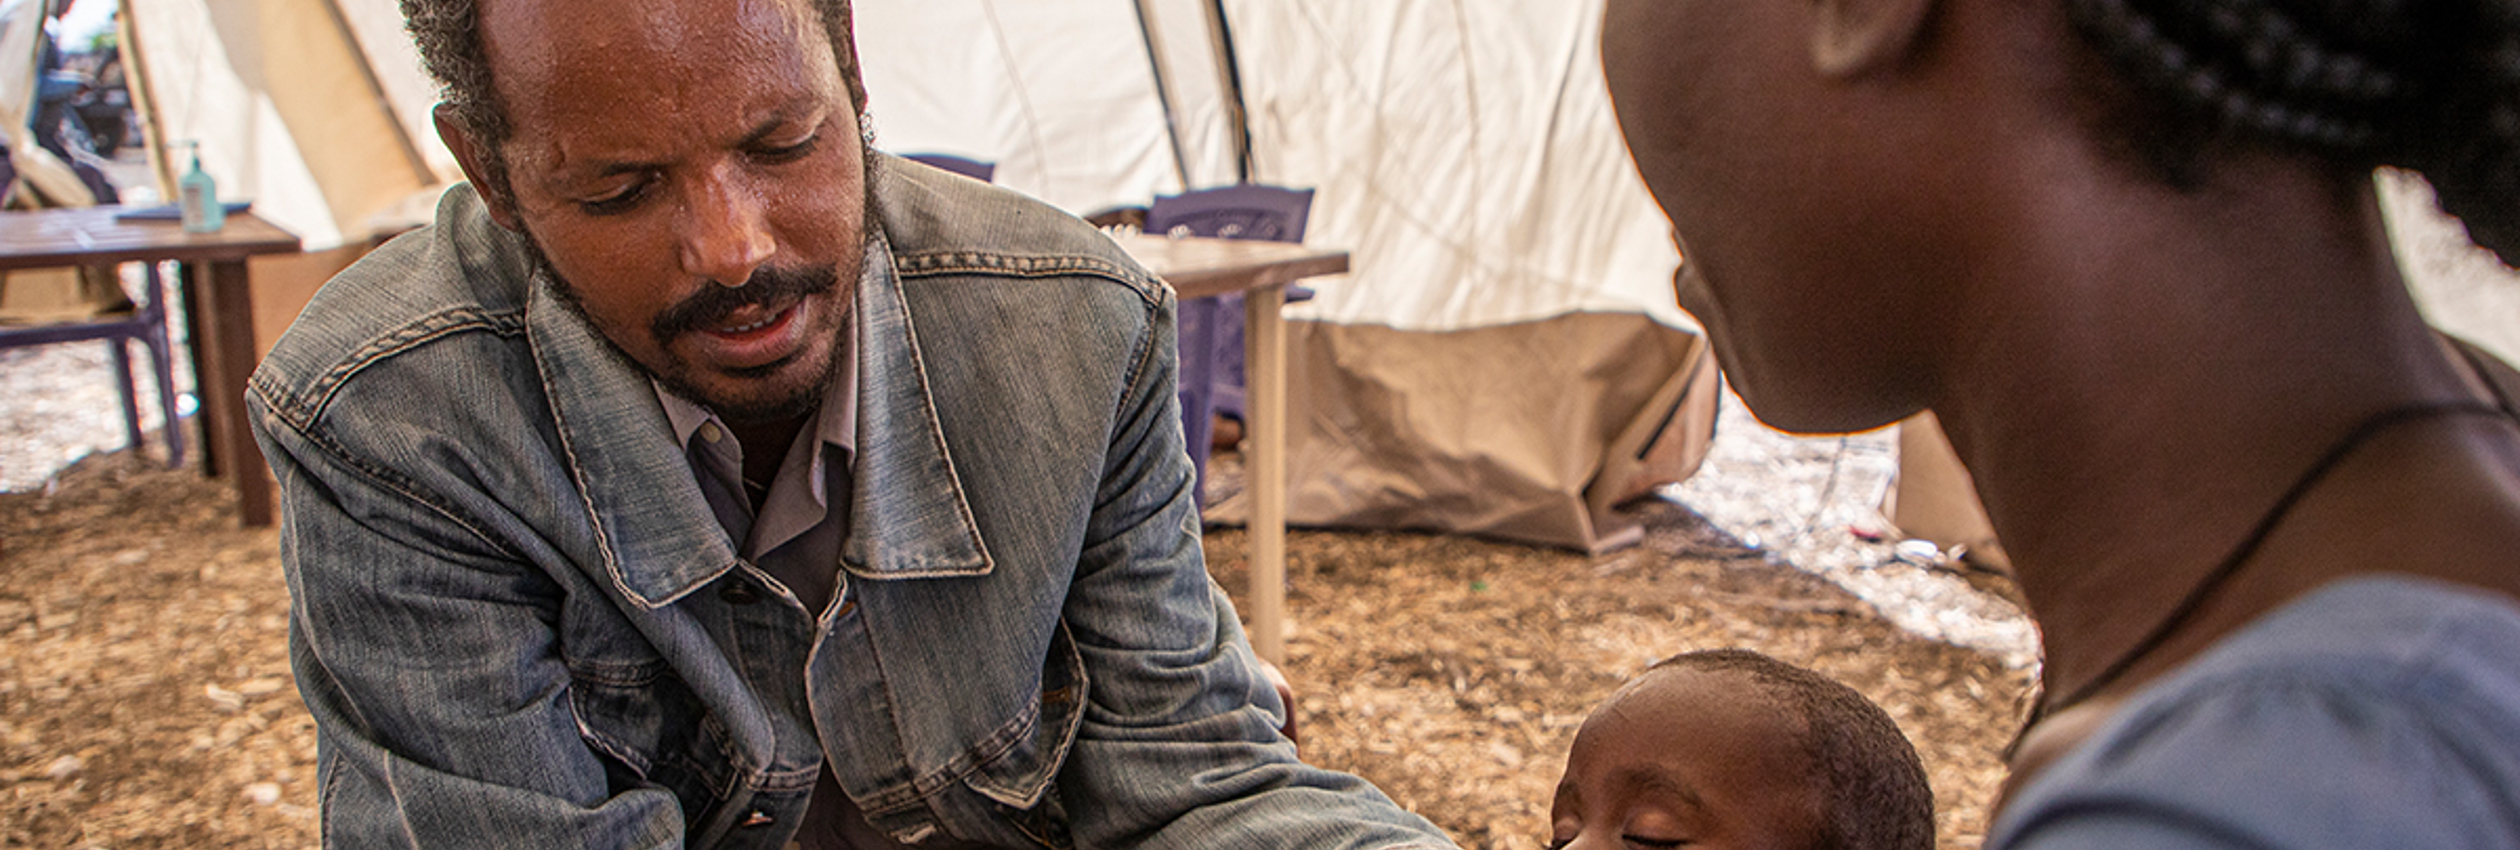 Conflict in Ethiopia has left their future uncertain. But refugees continue to show care and compassion to those around them. 